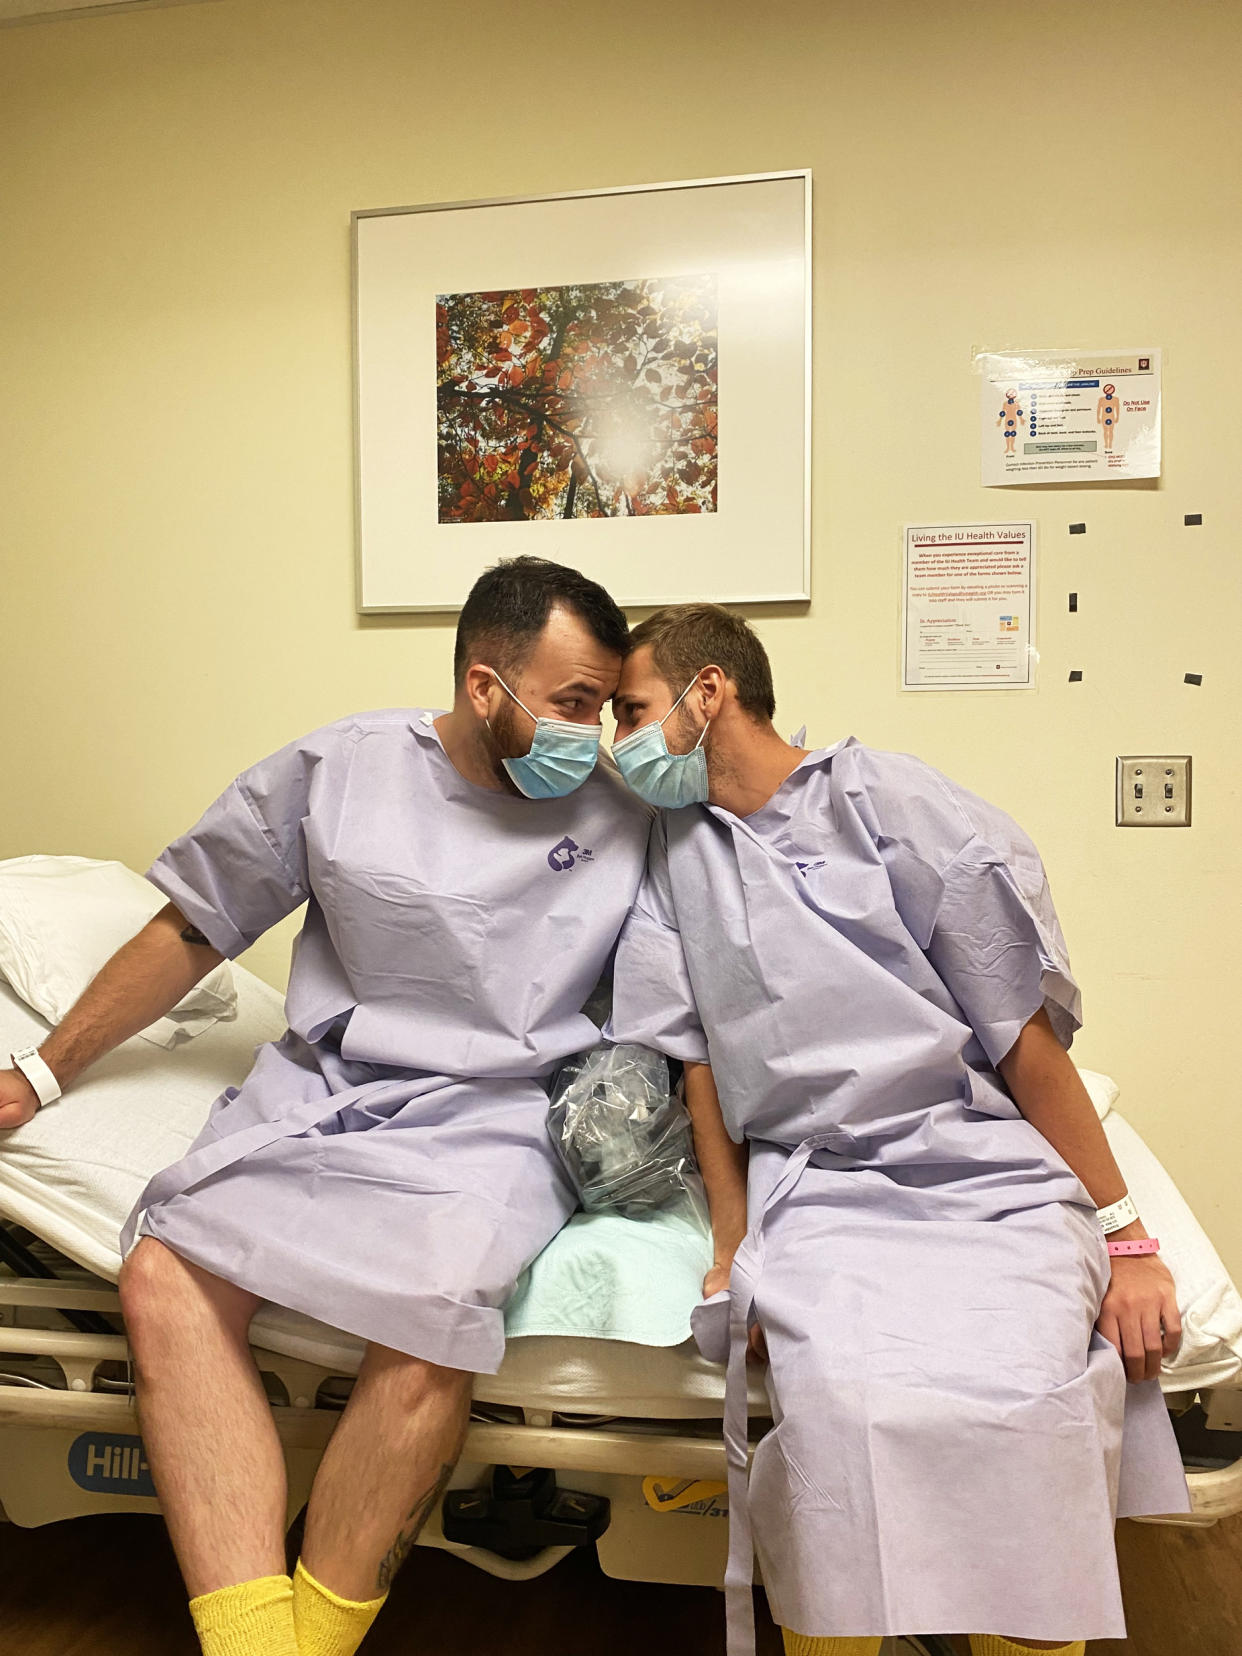 Husbands Rafael Diaz, left, and Reid Alexander share a tender moment together at Indiana University Health Methodist Hospital in Indianapolis on Aug. 13, 2021. Diaz donated one of his kidneys to Alexander. (Courtesy Rafael Diaz)